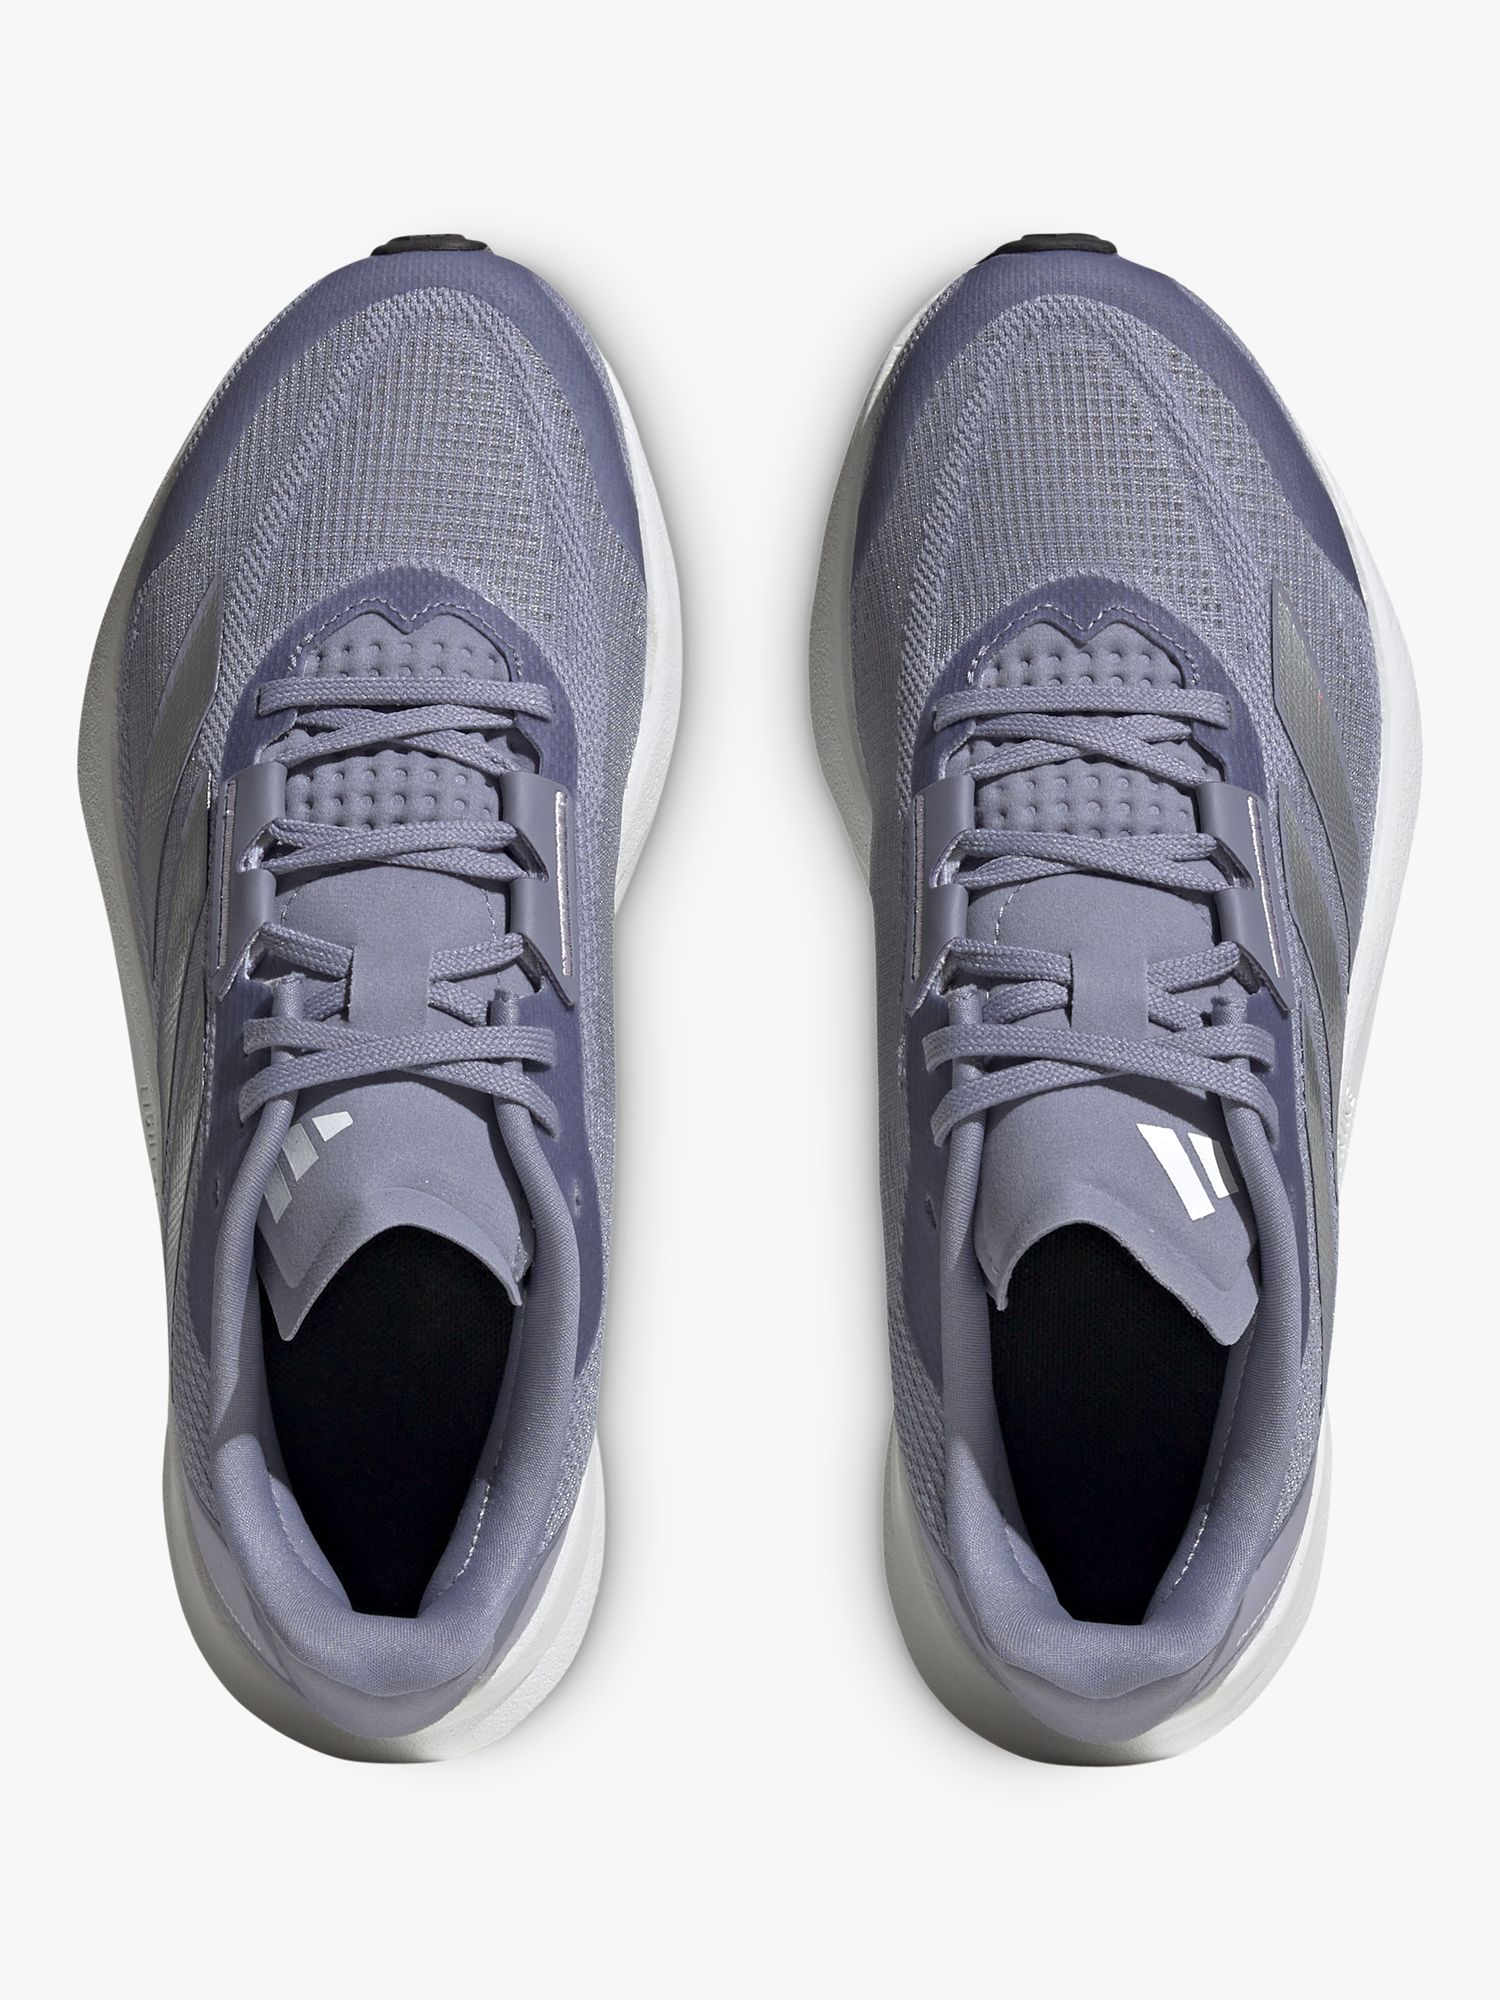 Buy adidas Duramo Speed Trainers, Silver/Silver Dawn Online at johnlewis.com